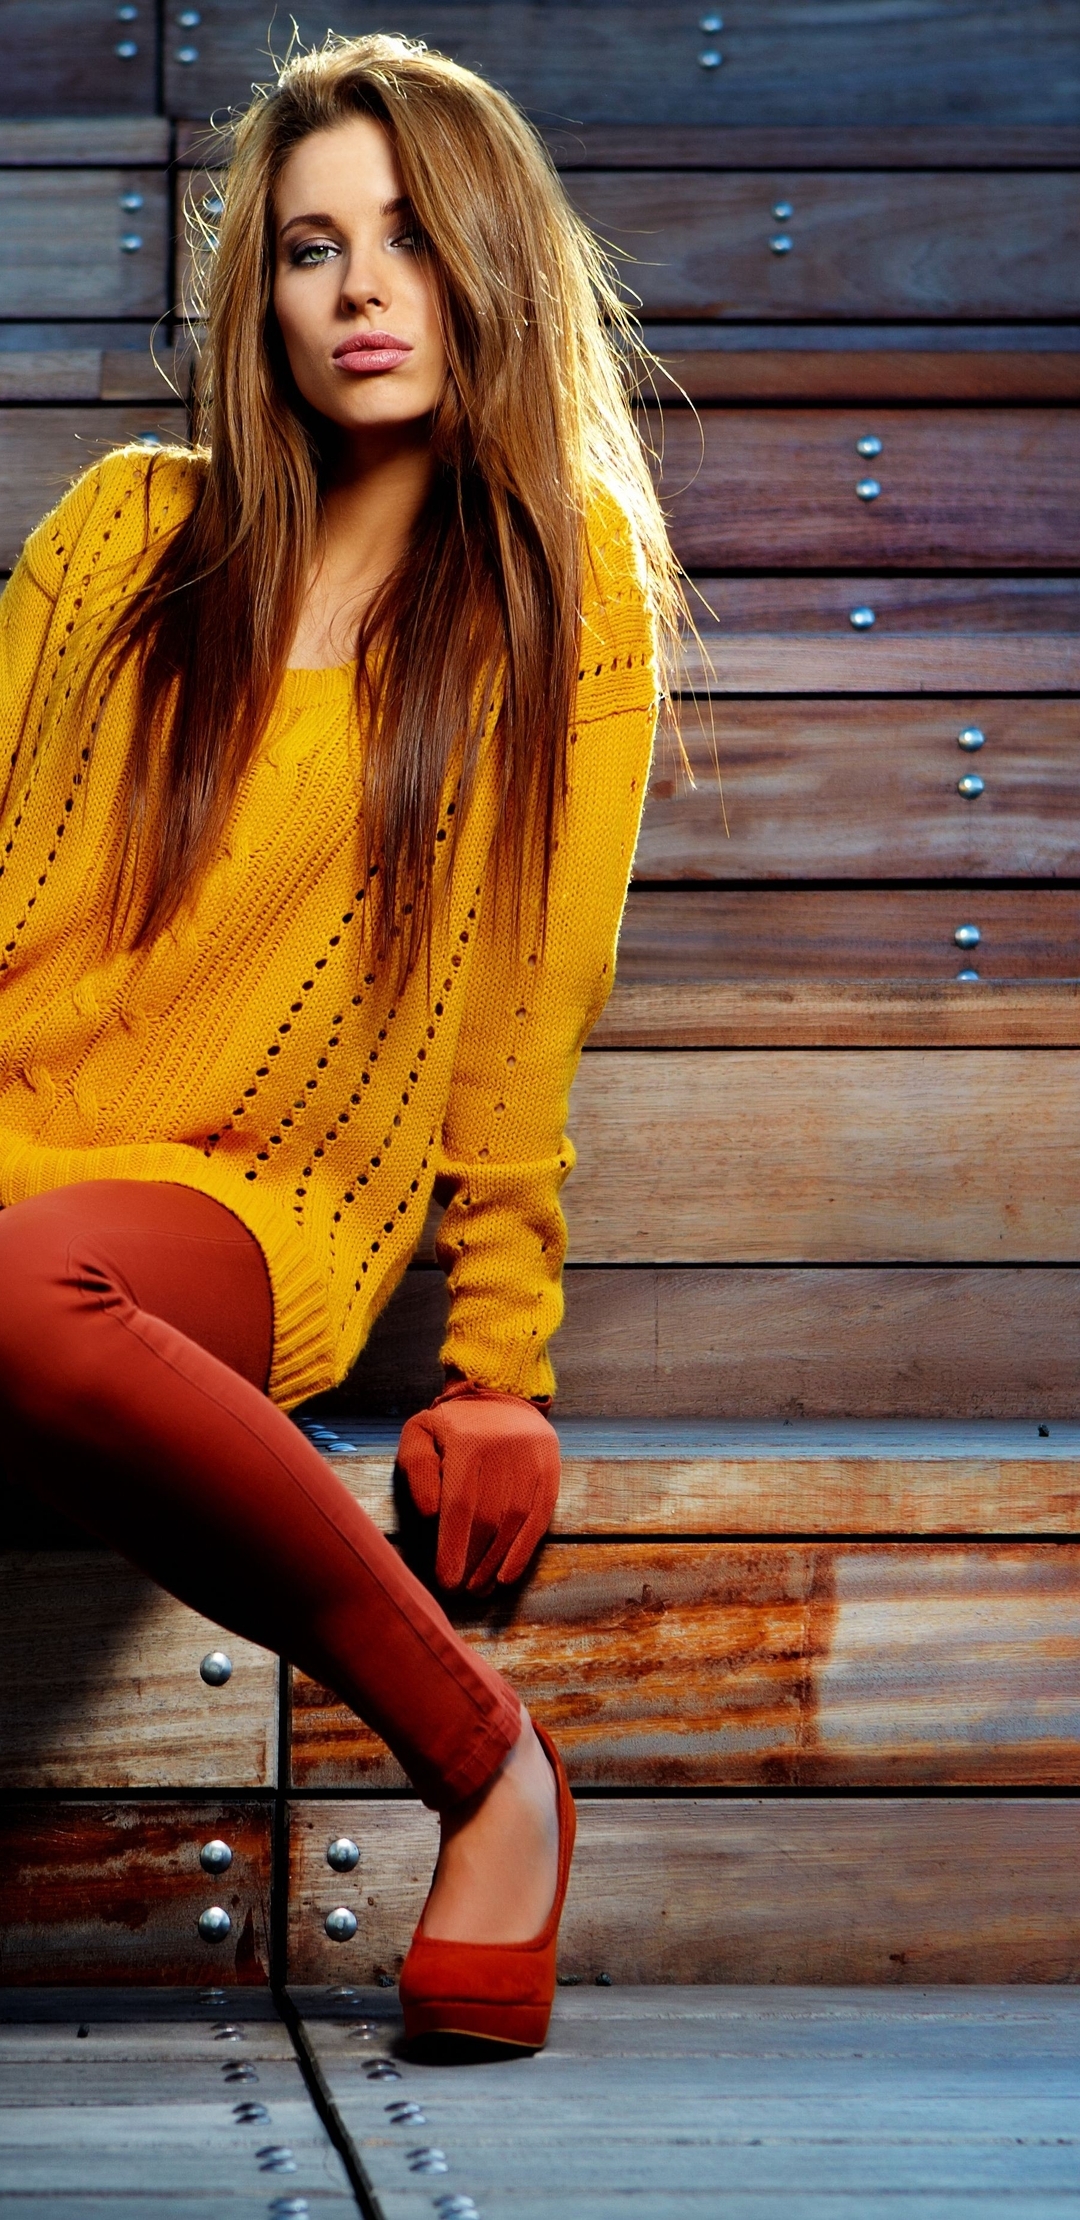 Image: Girl, light brown hair, posing, style, fashion, bright colors, shoes, jacket